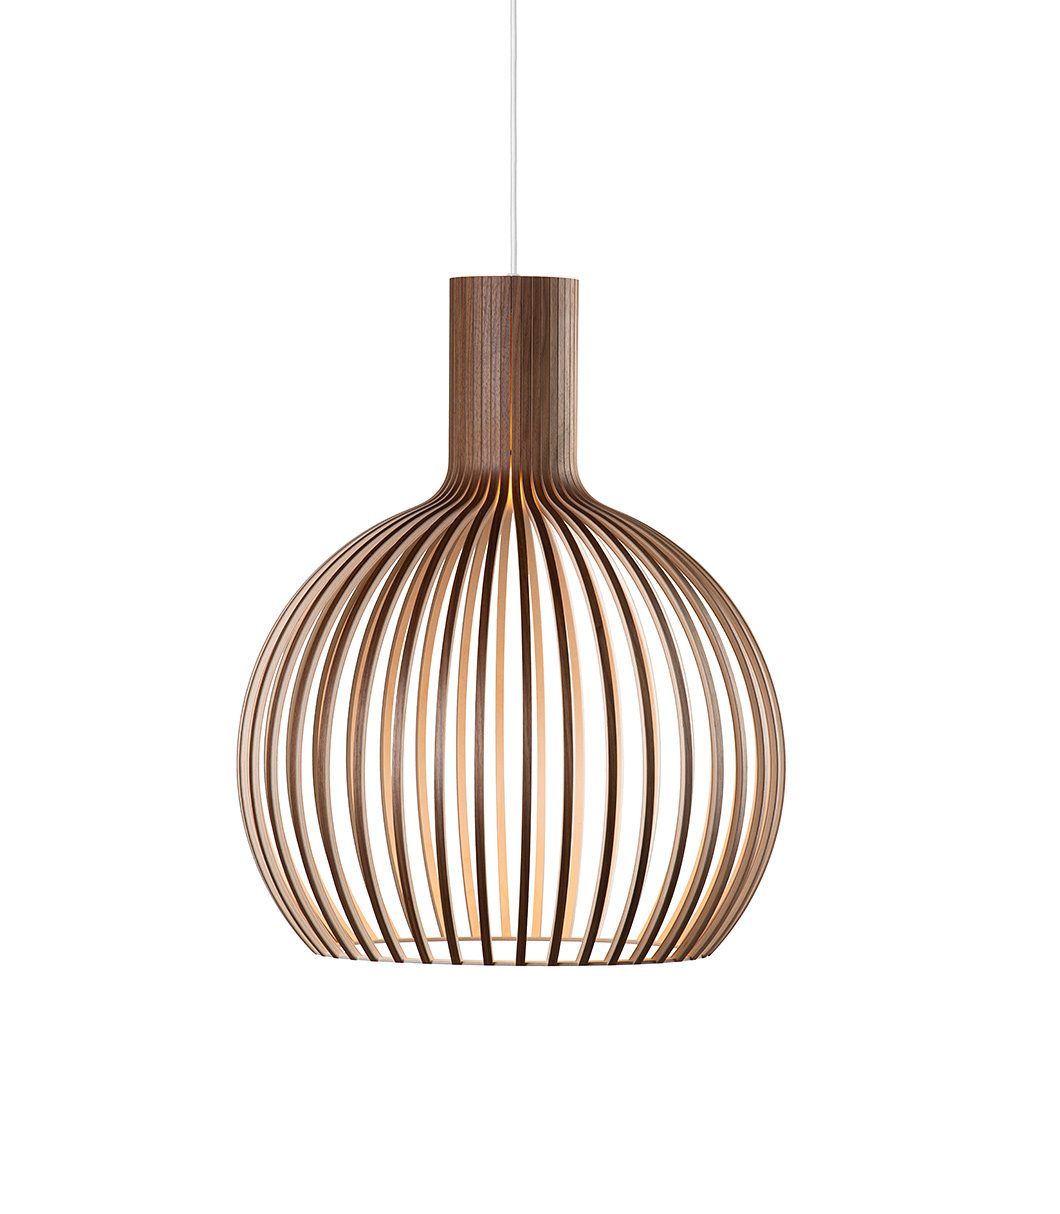 Octo Small 4241 pendant lamp is available in walnut veneer